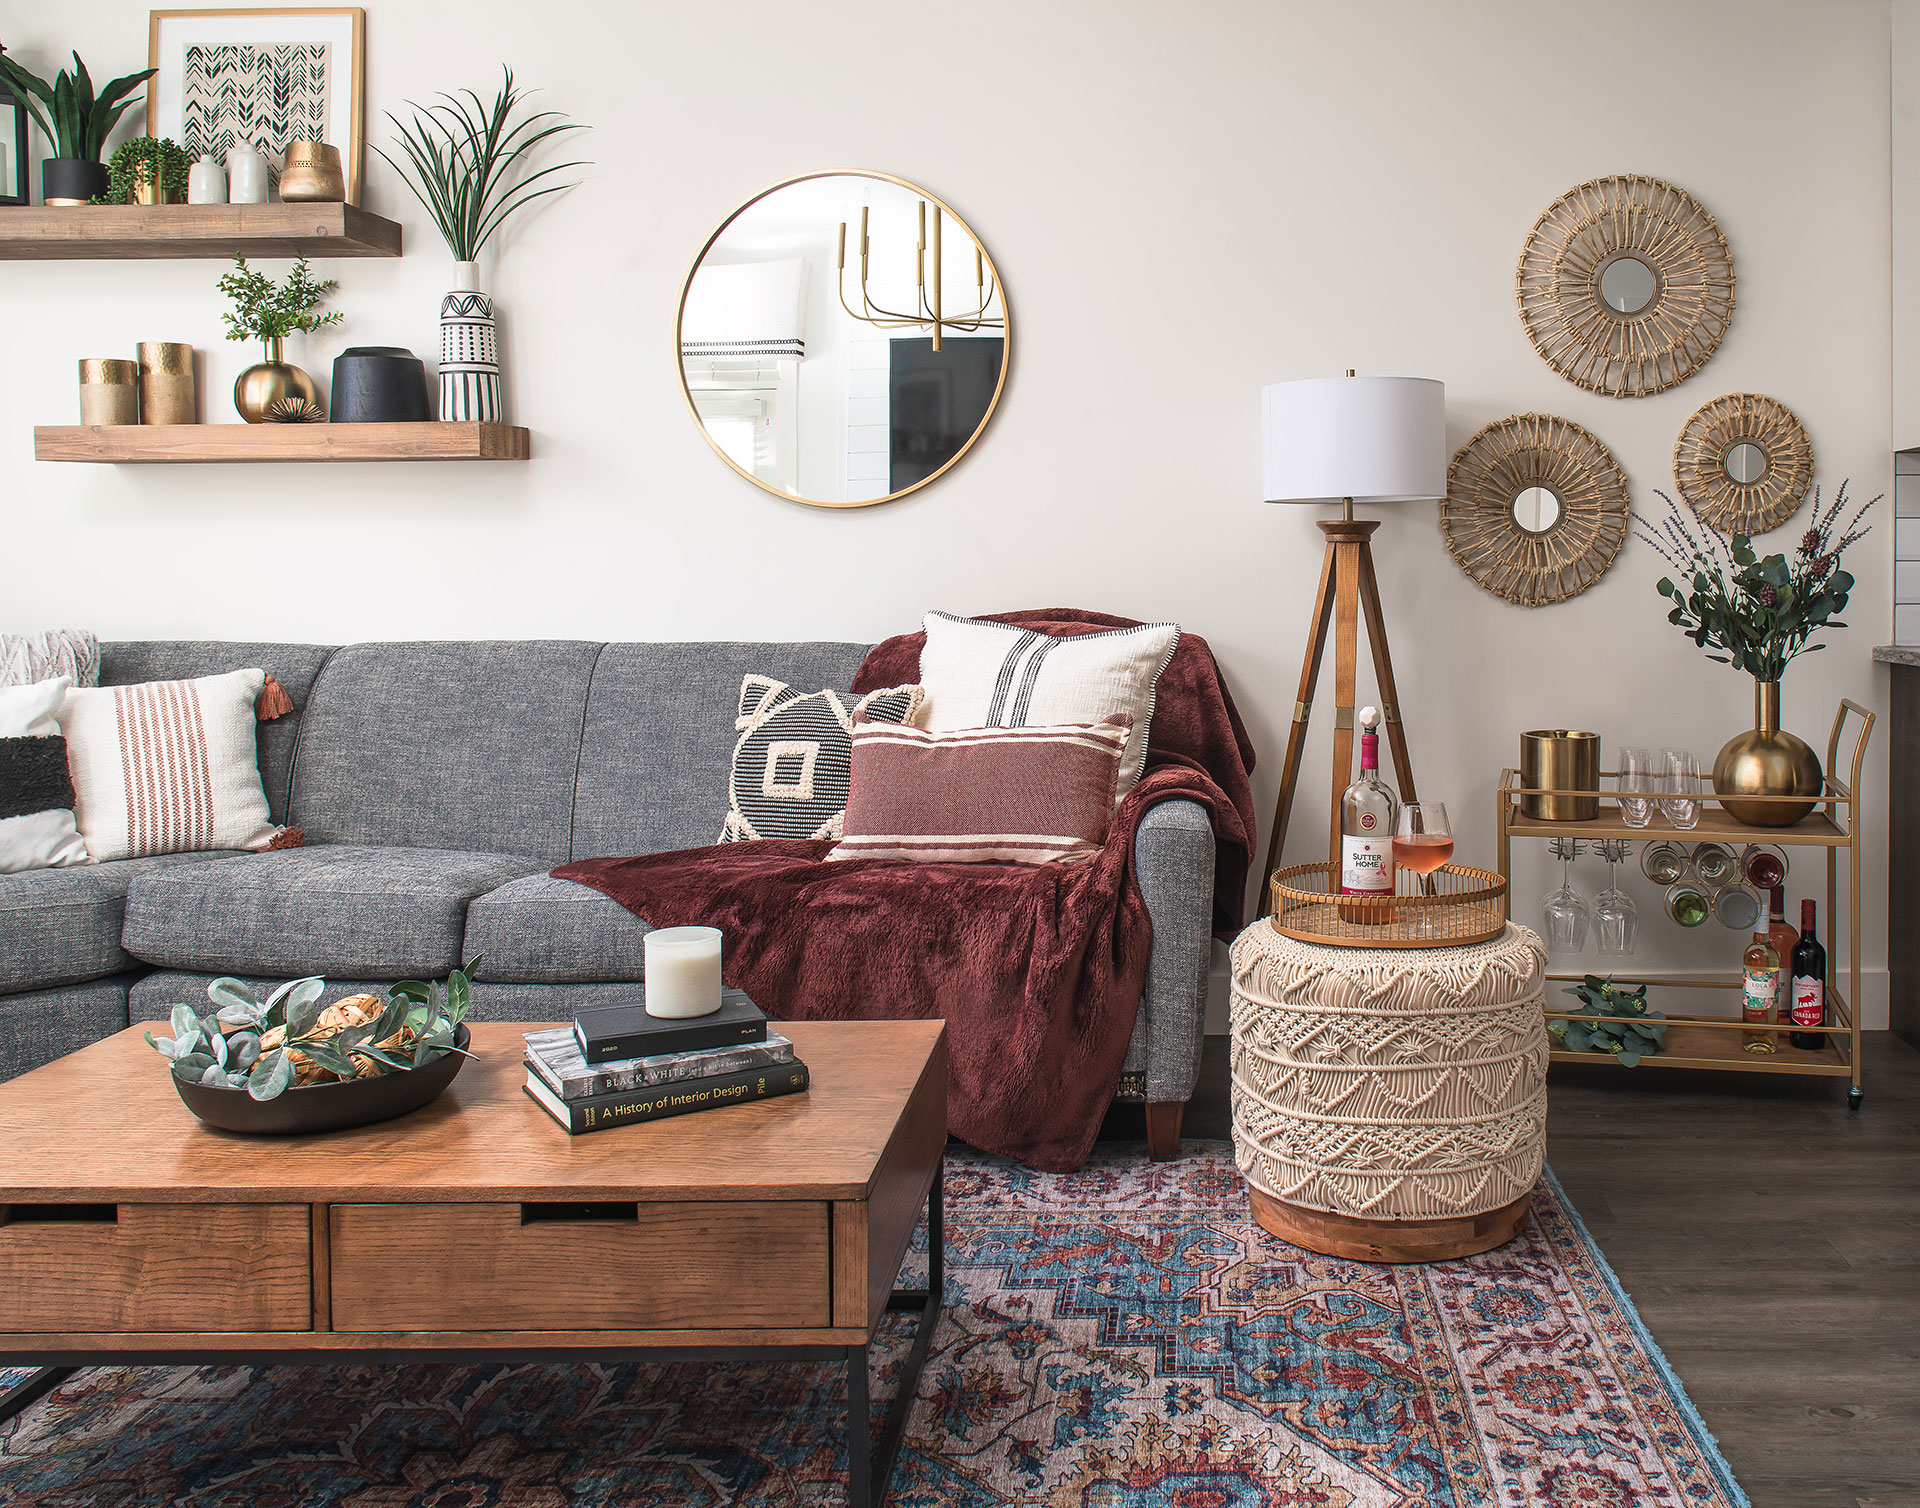 Creating a cozy living space when the world is upside down